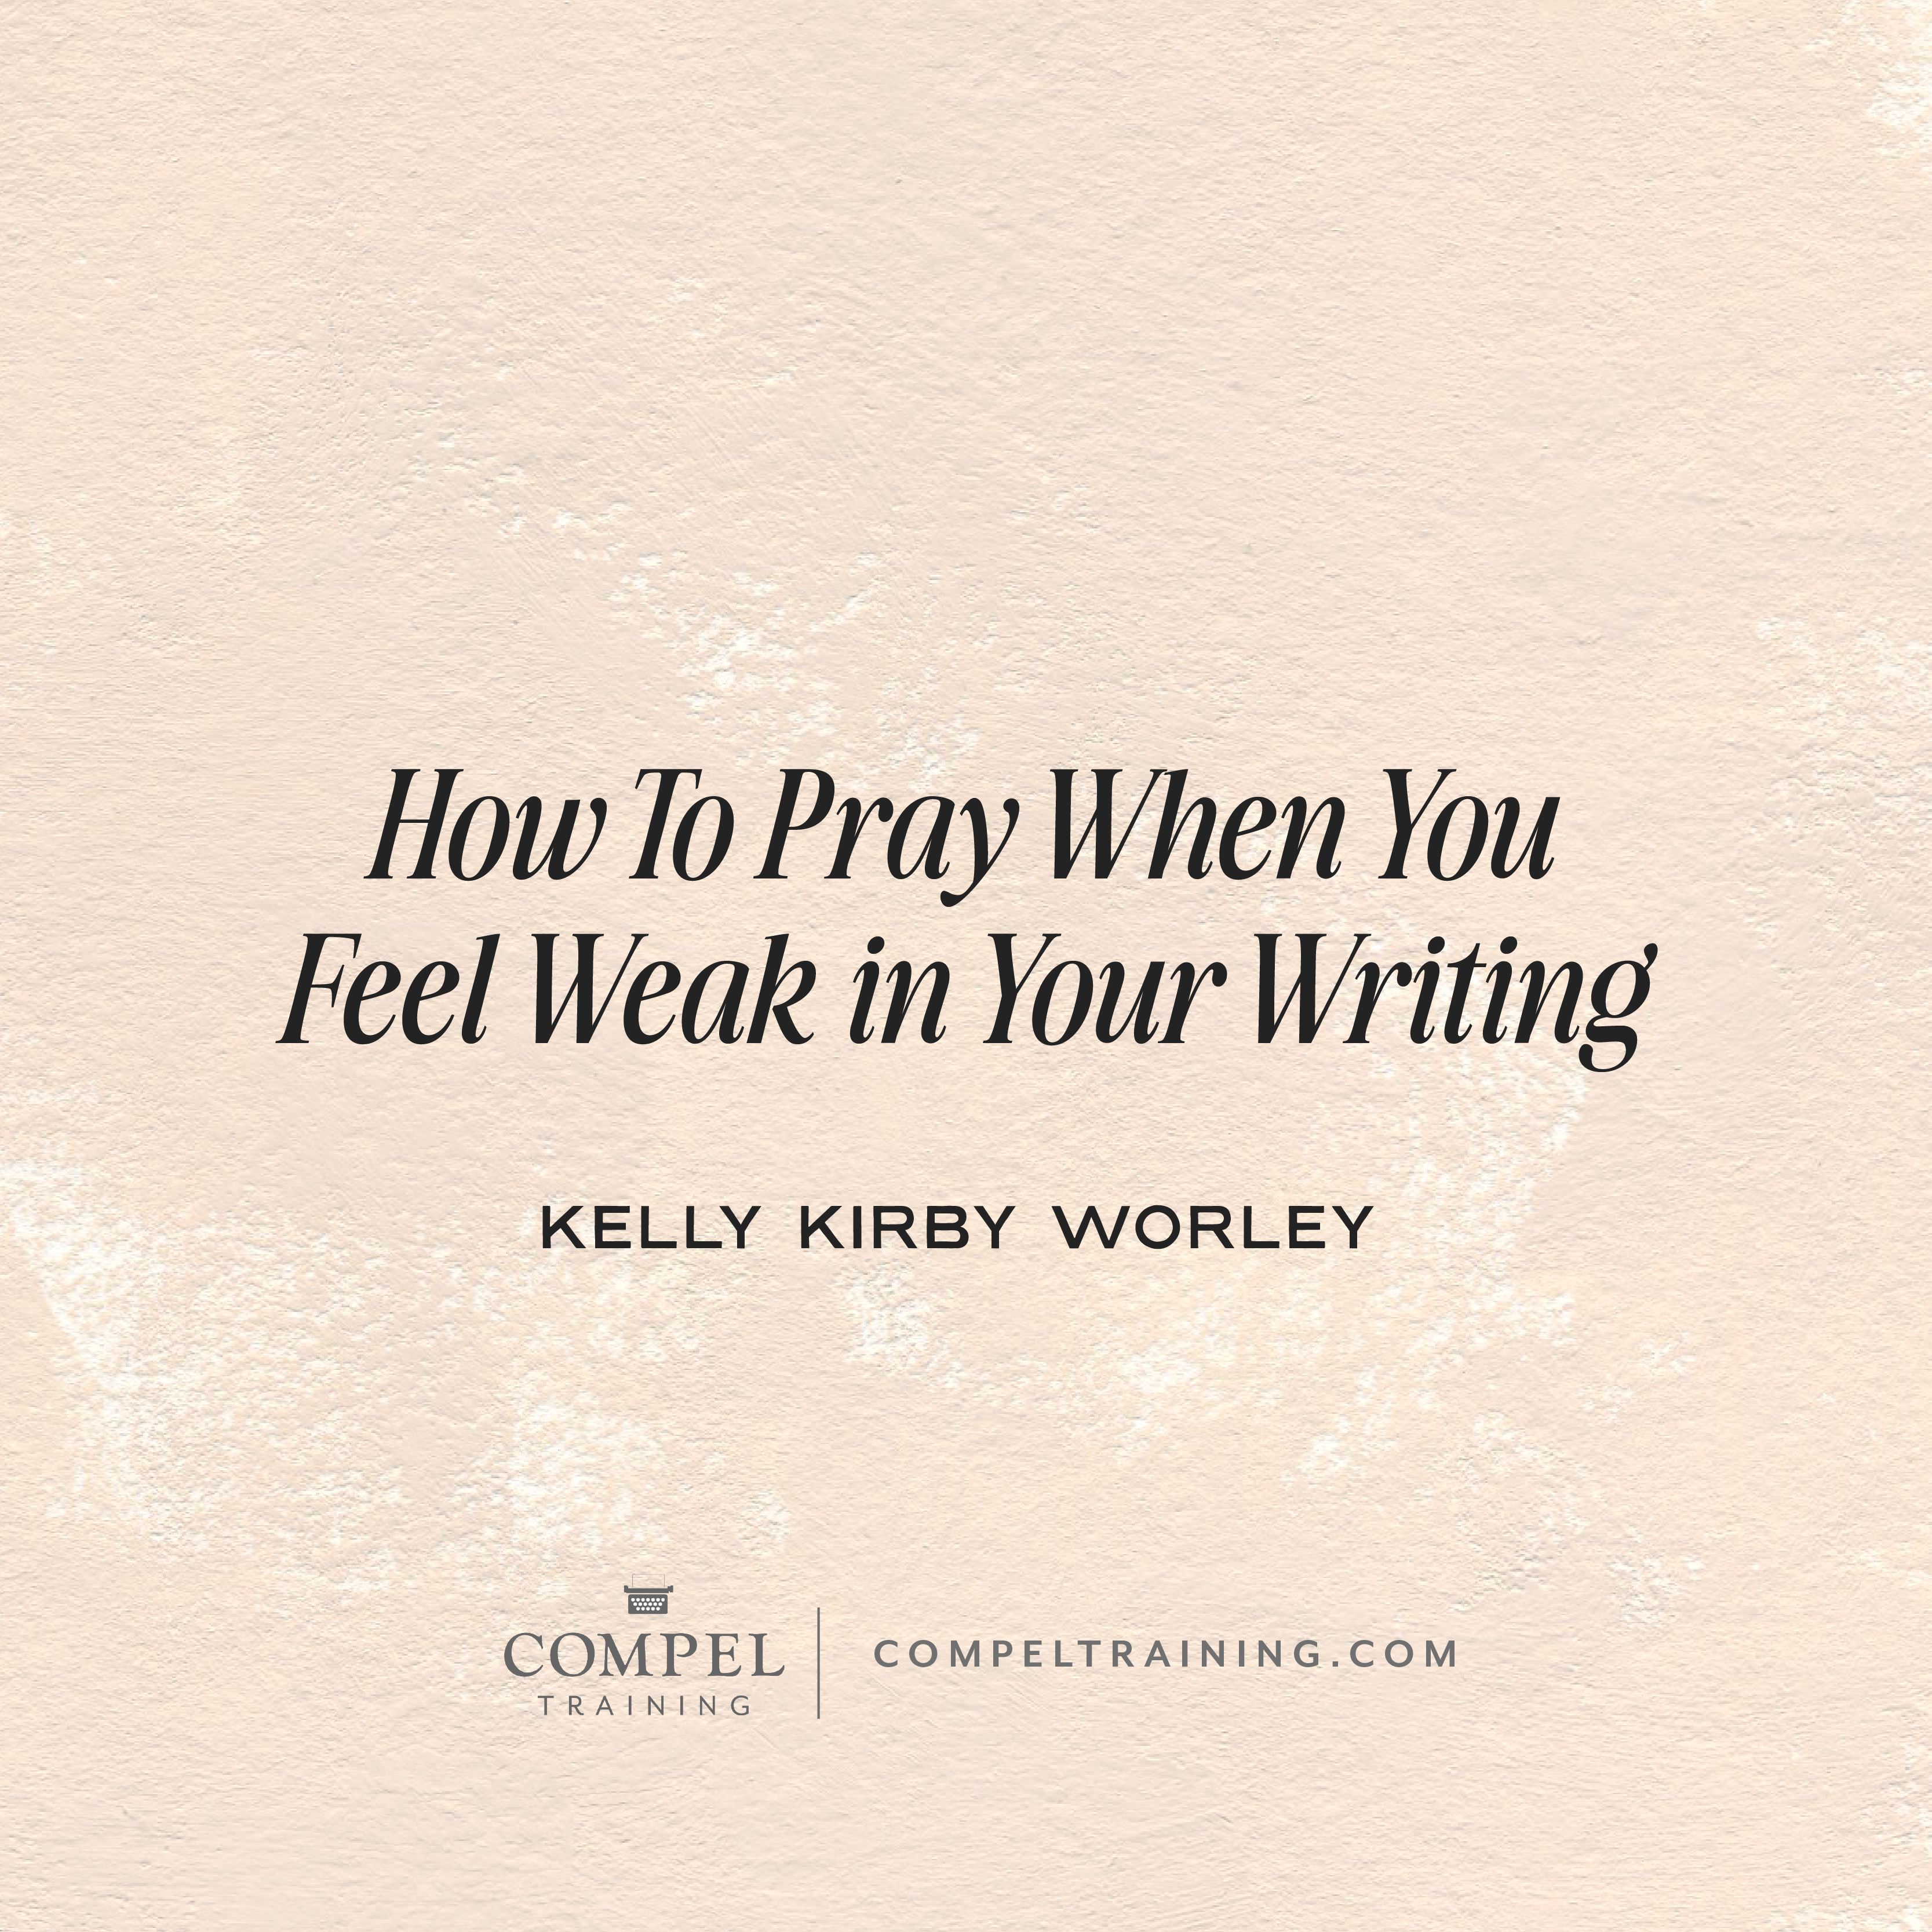 Let’s face it ... we all need a good old-fashioned pep rally of prayer and praise to find success in our writing. We can’t pour into others from an empty cup. Here are some ways you can seek strength to fulfill your calling from the One who calls and equips you to complete it.